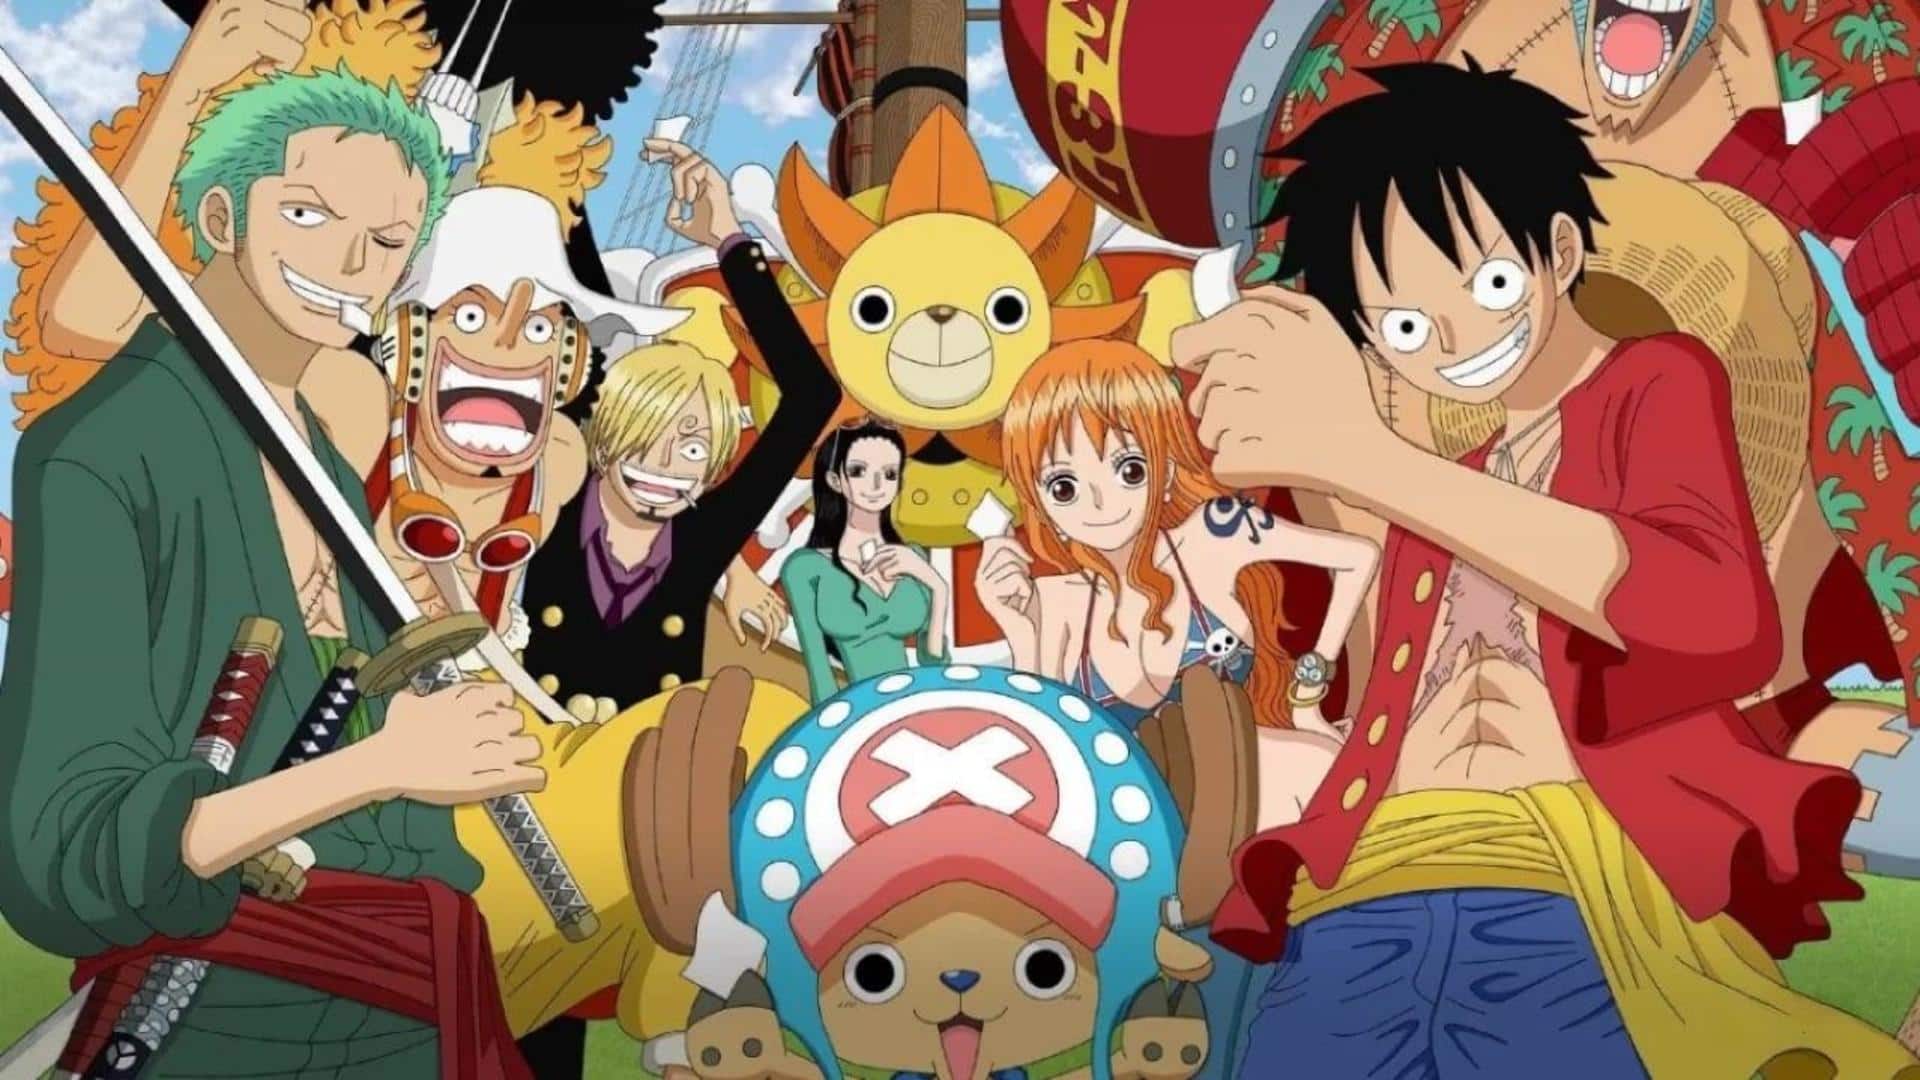 One Piece creator breaks his own Guinness World Record